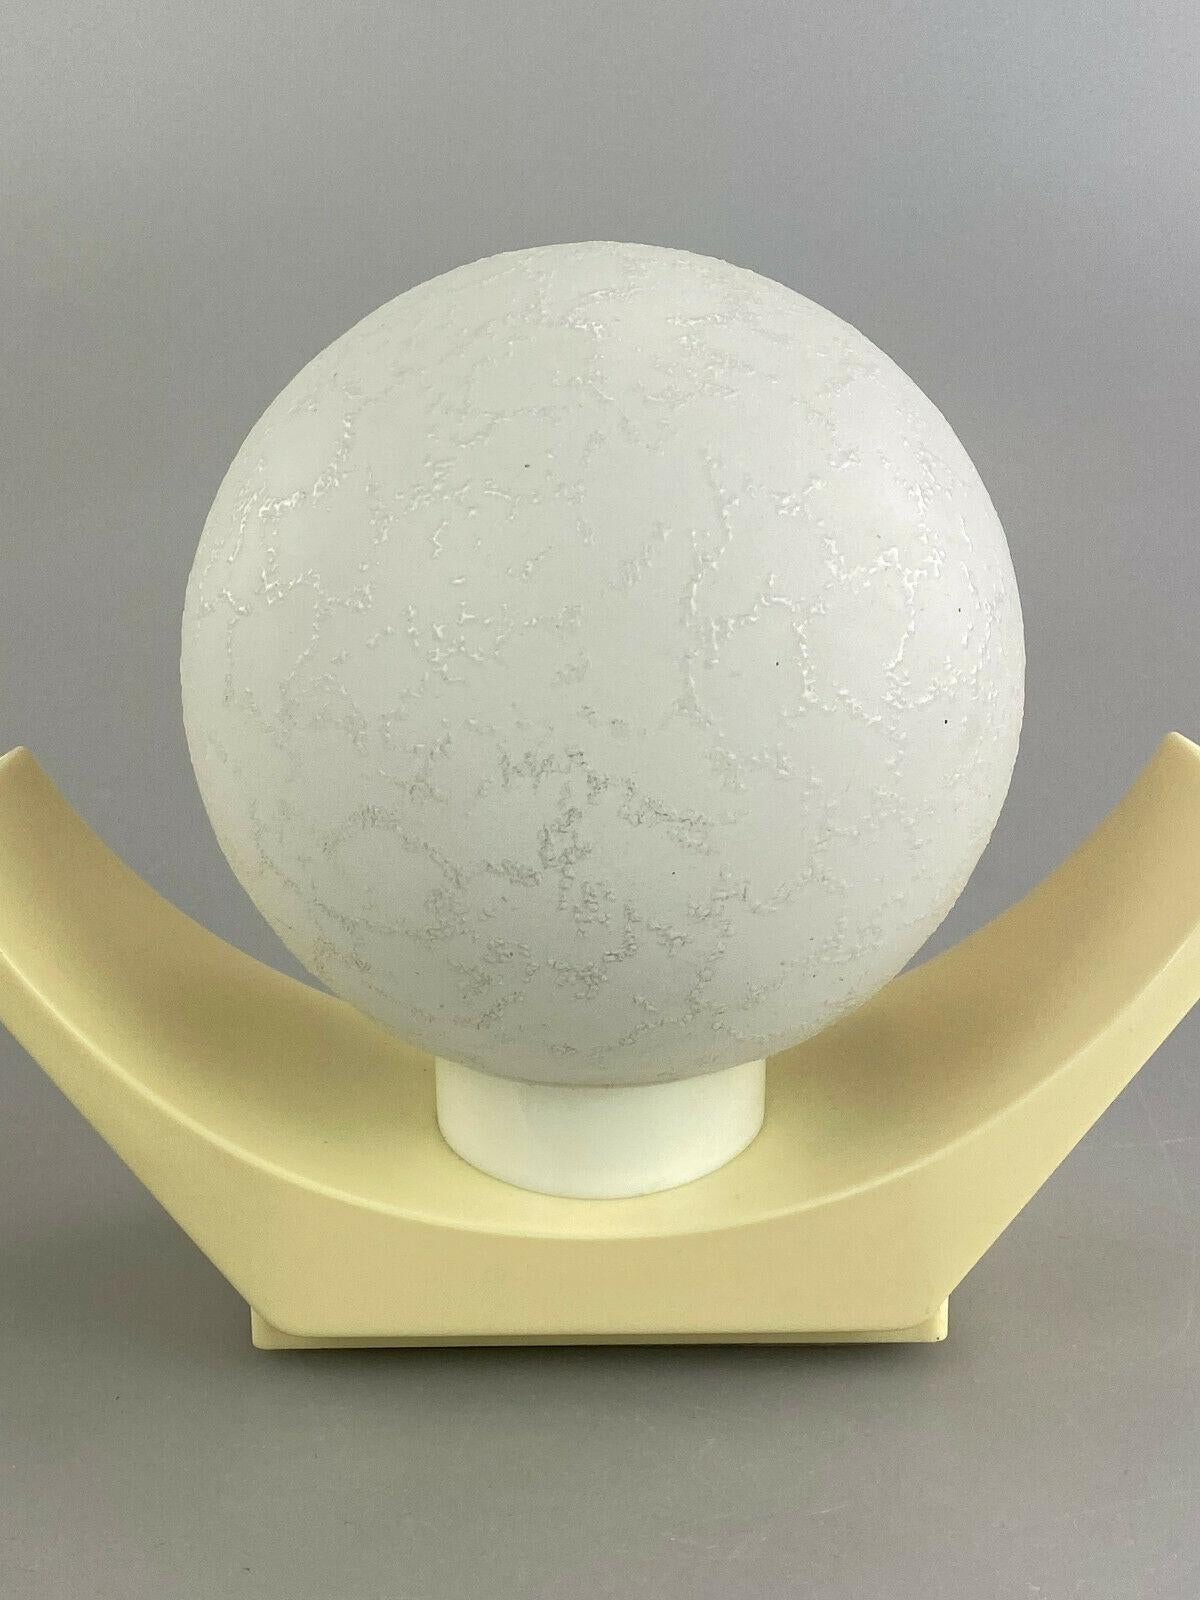 European 60s 70s Wall Lamp Ball Lamp Lamp Light Space Age Design For Sale